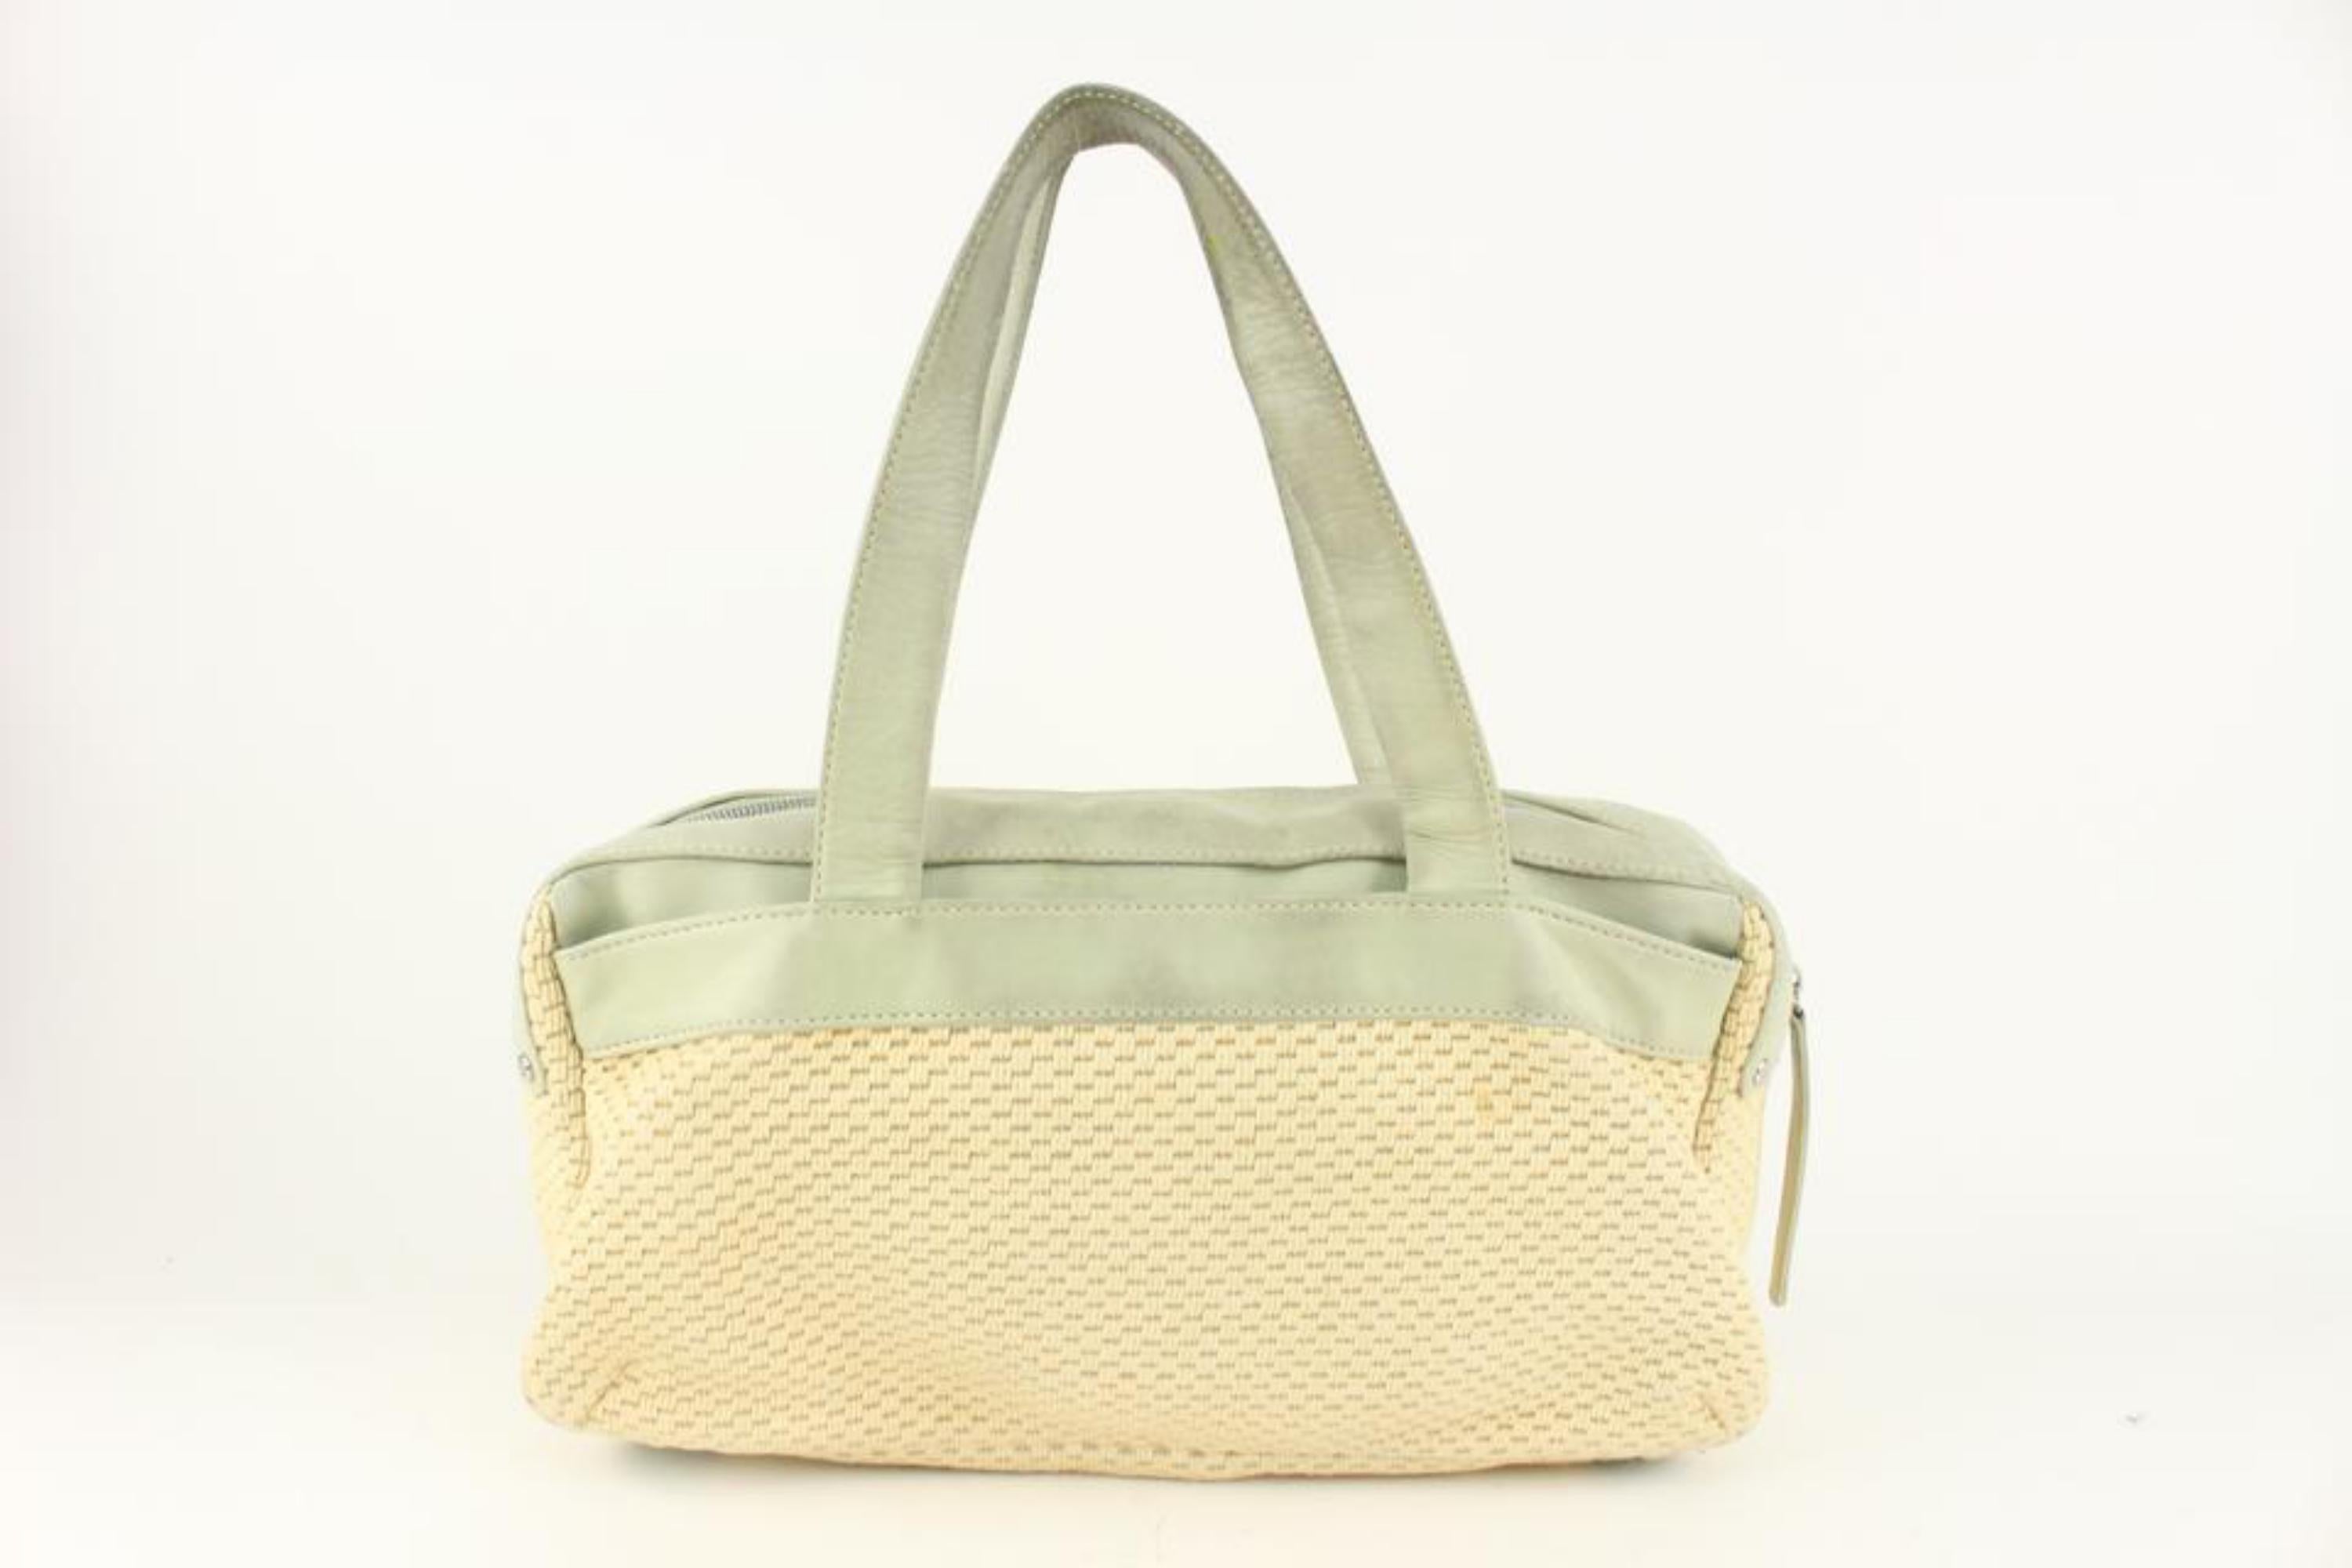 Chanel Ivory x Green Woven Fabric x Leather Boston Shoulder Bag 1115c7 6